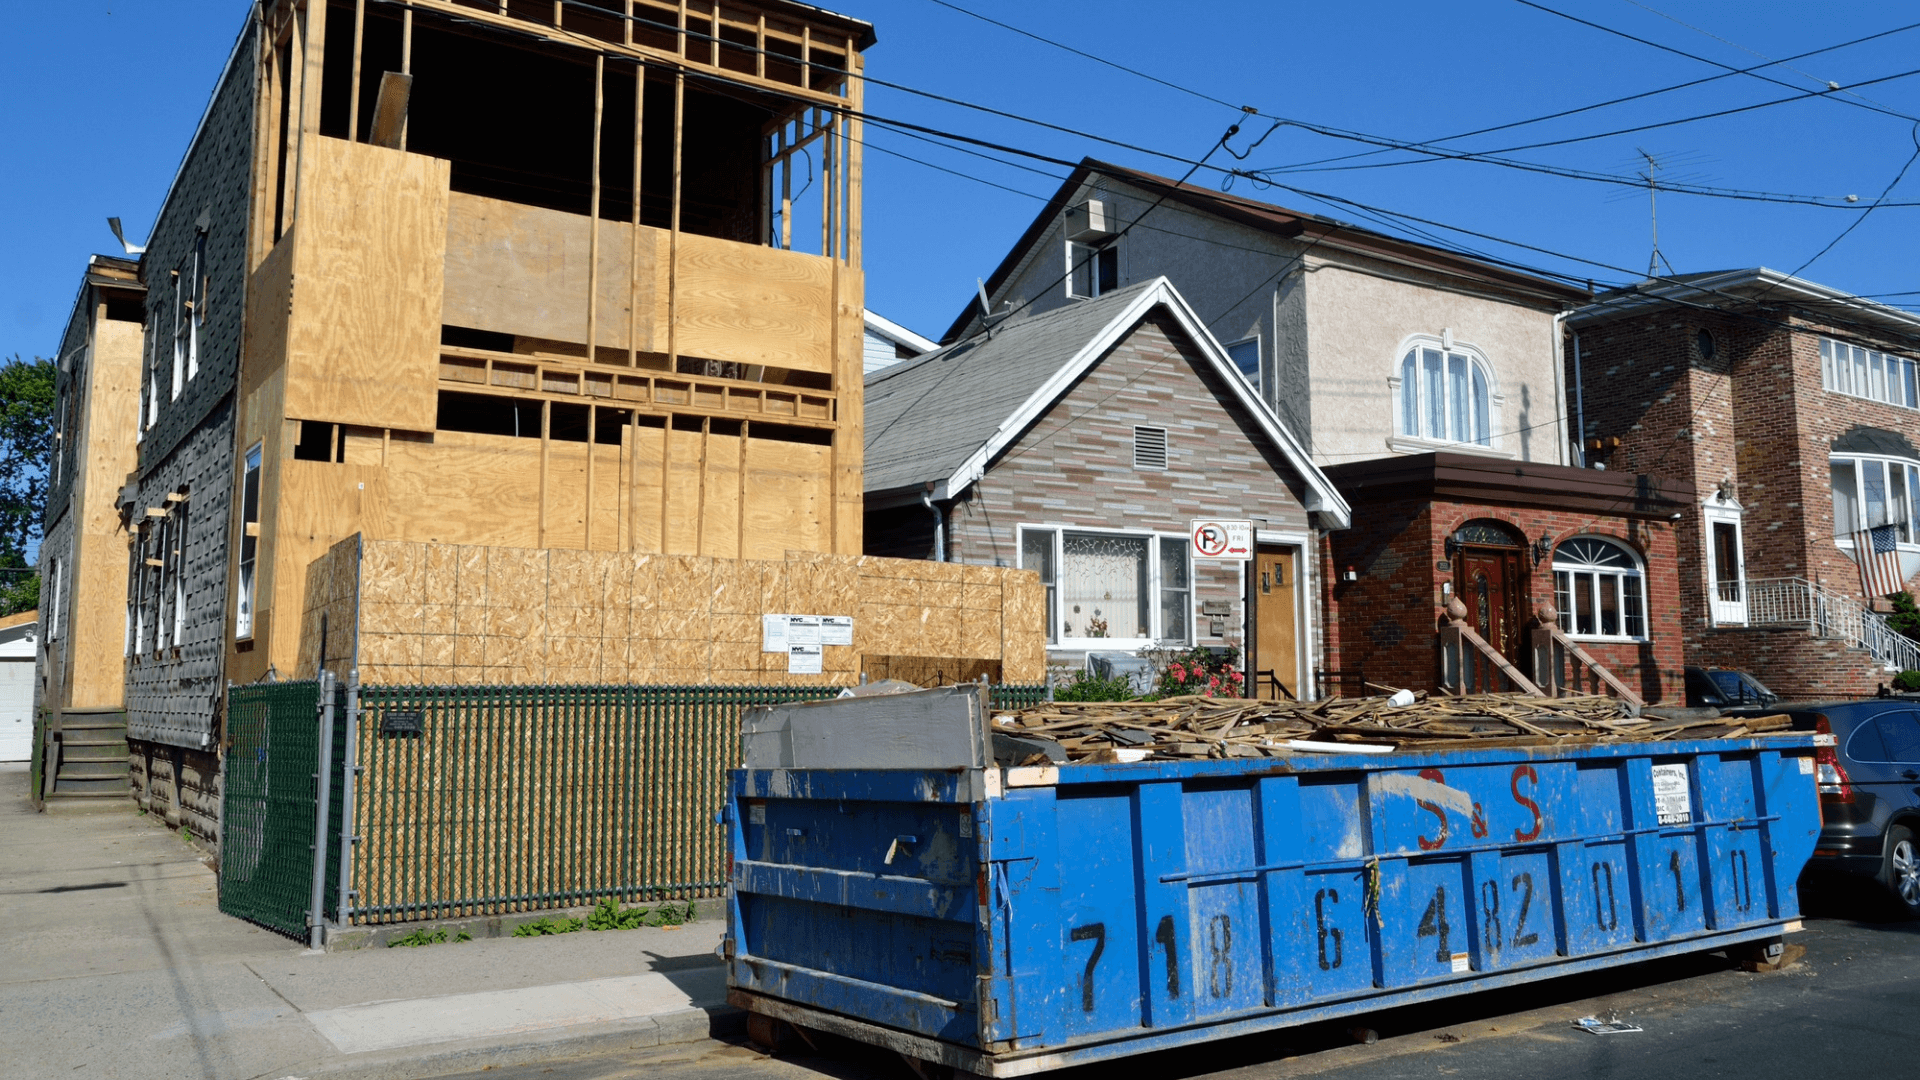 New condo being built with a Payless Roll-off Dumpster in front yard